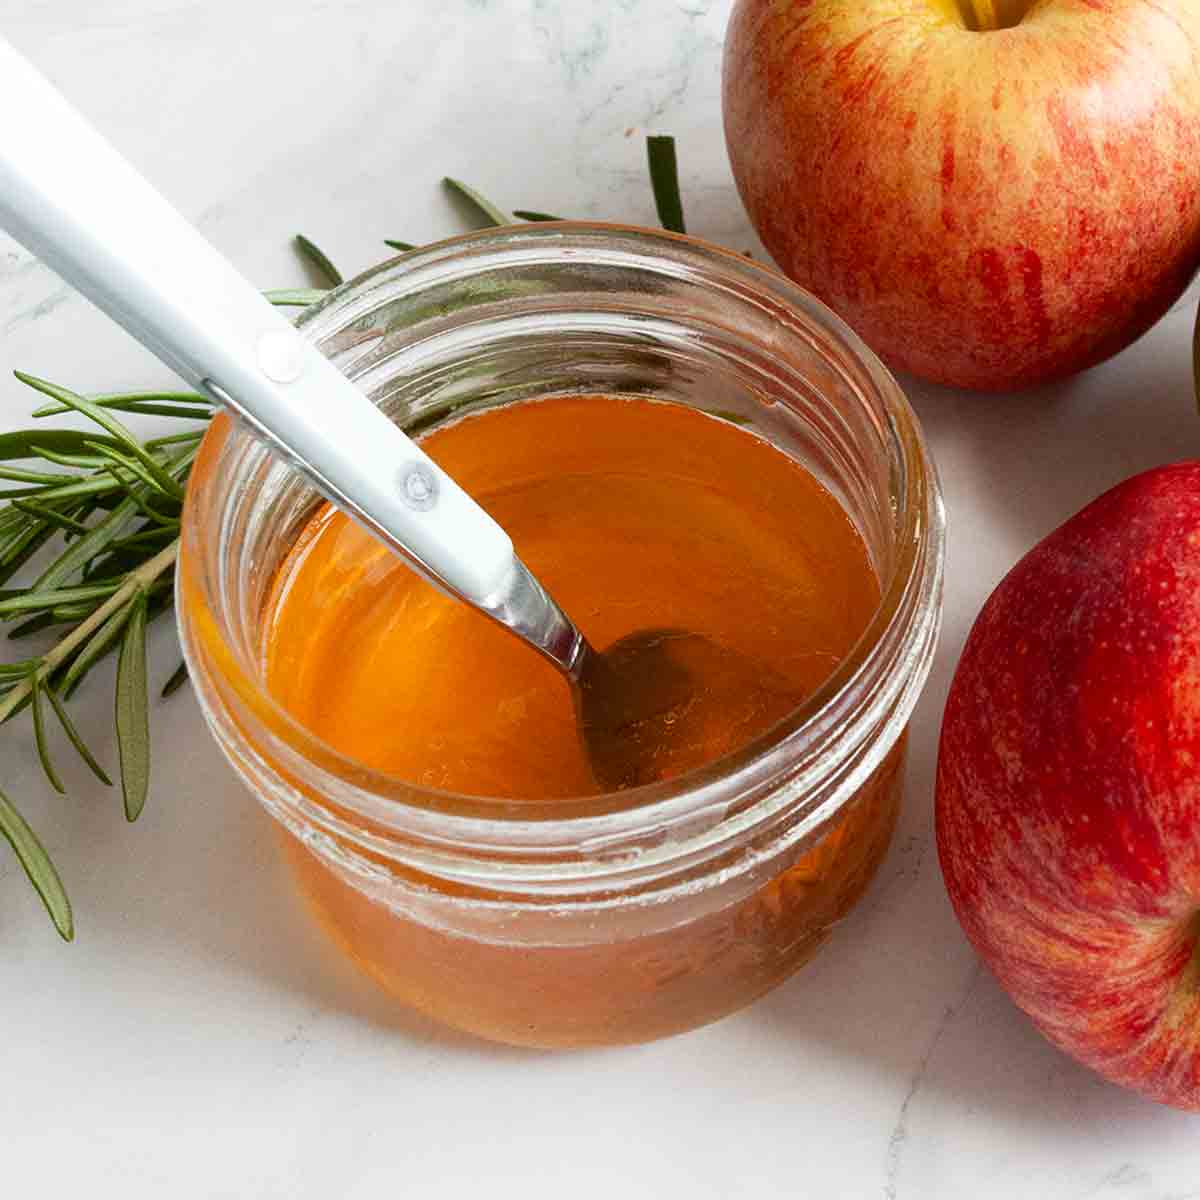 A small jar of apple jelly with a spoon in it.